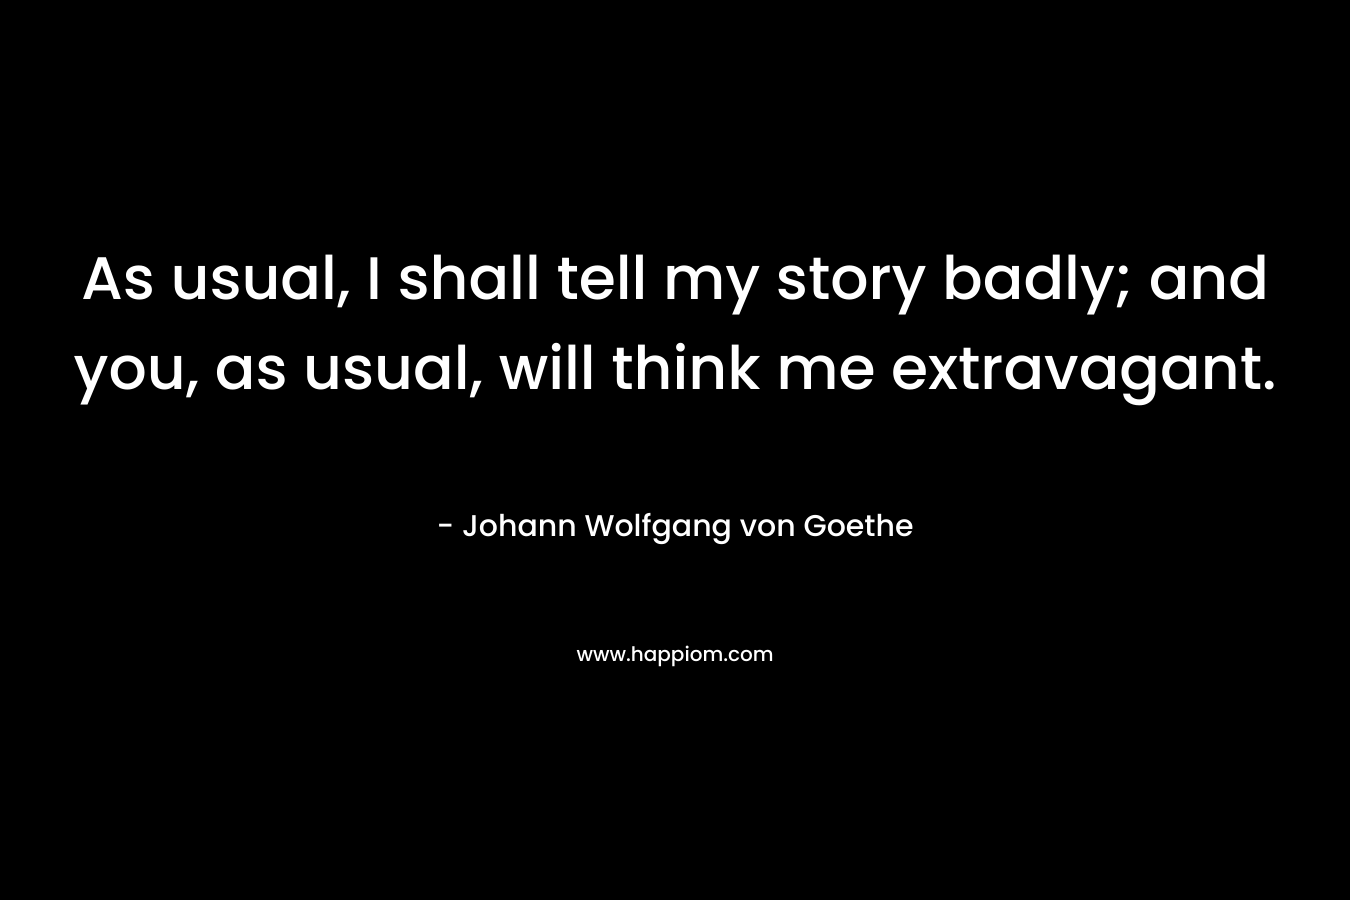 As usual, I shall tell my story badly; and you, as usual, will think me extravagant. – Johann Wolfgang von Goethe